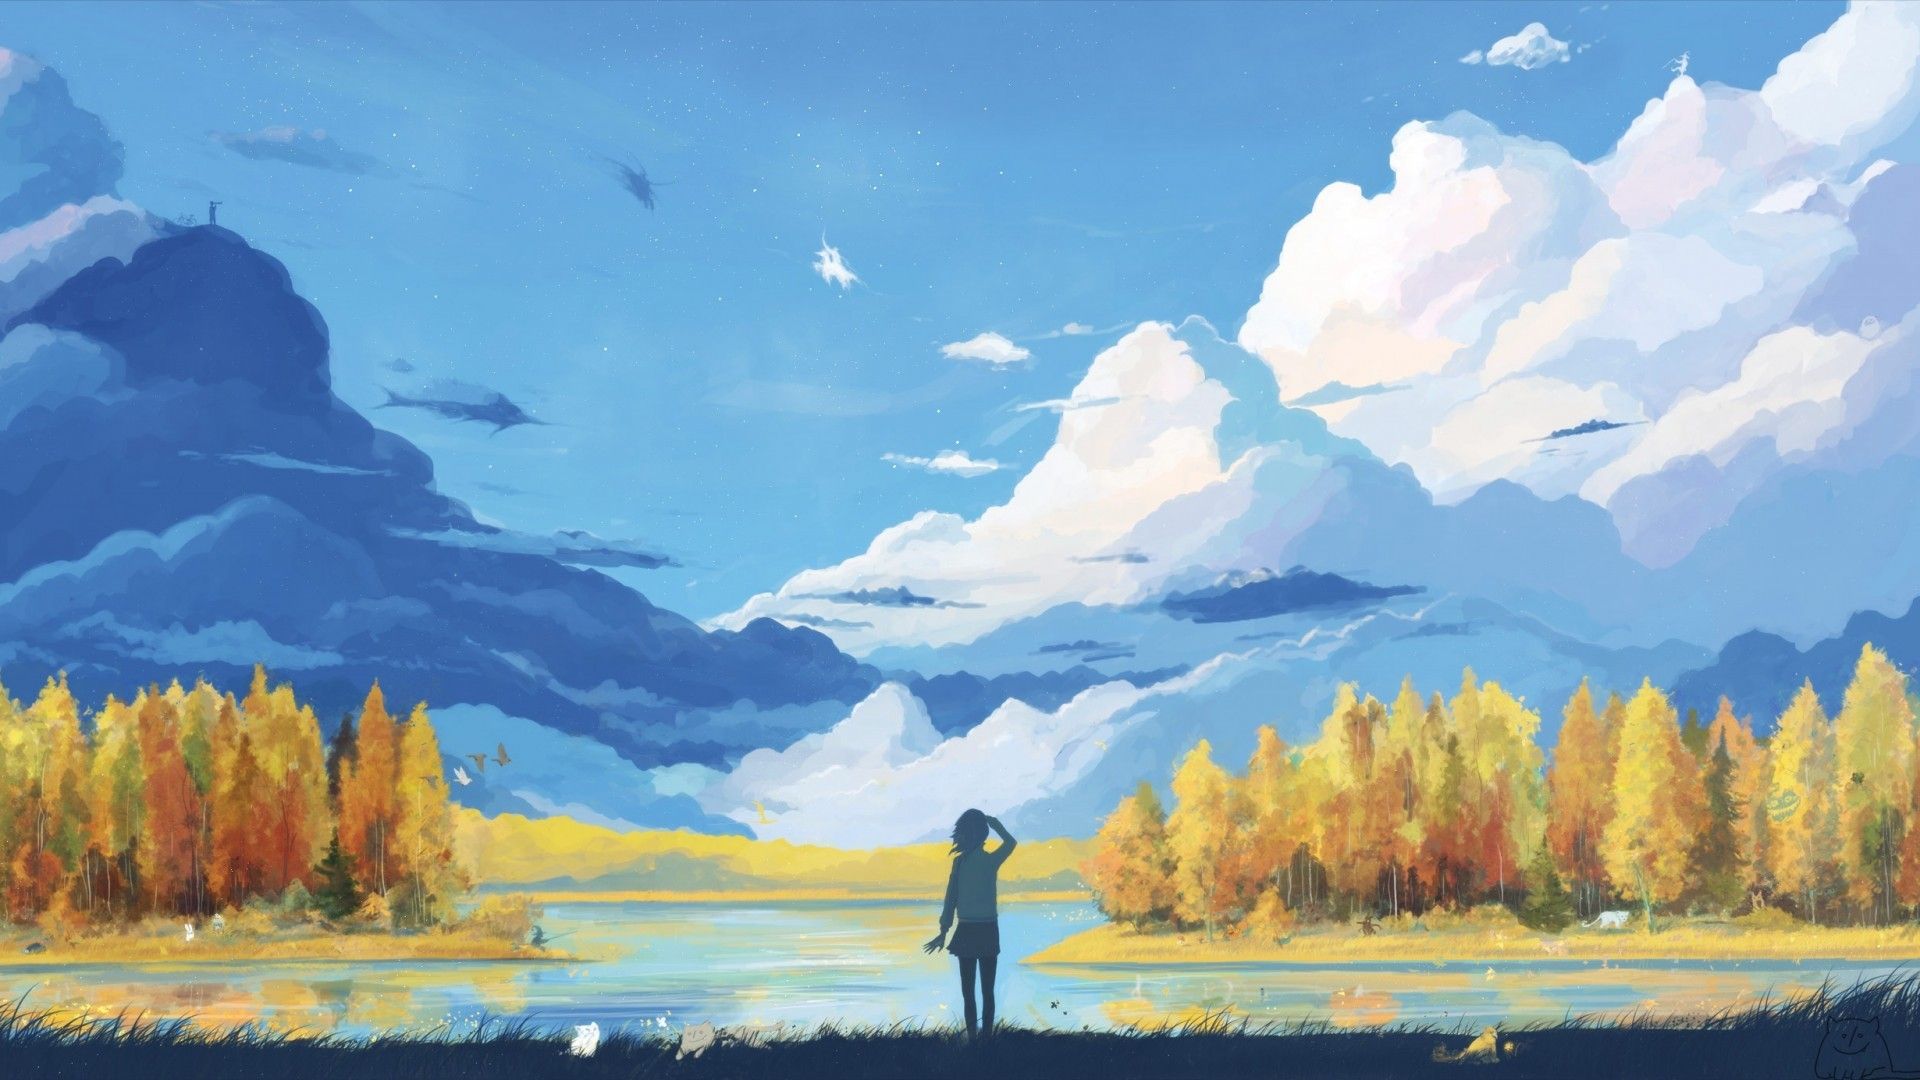 Download 1920x1080 Anime Landscape, Girl, Mountain, Relaxing